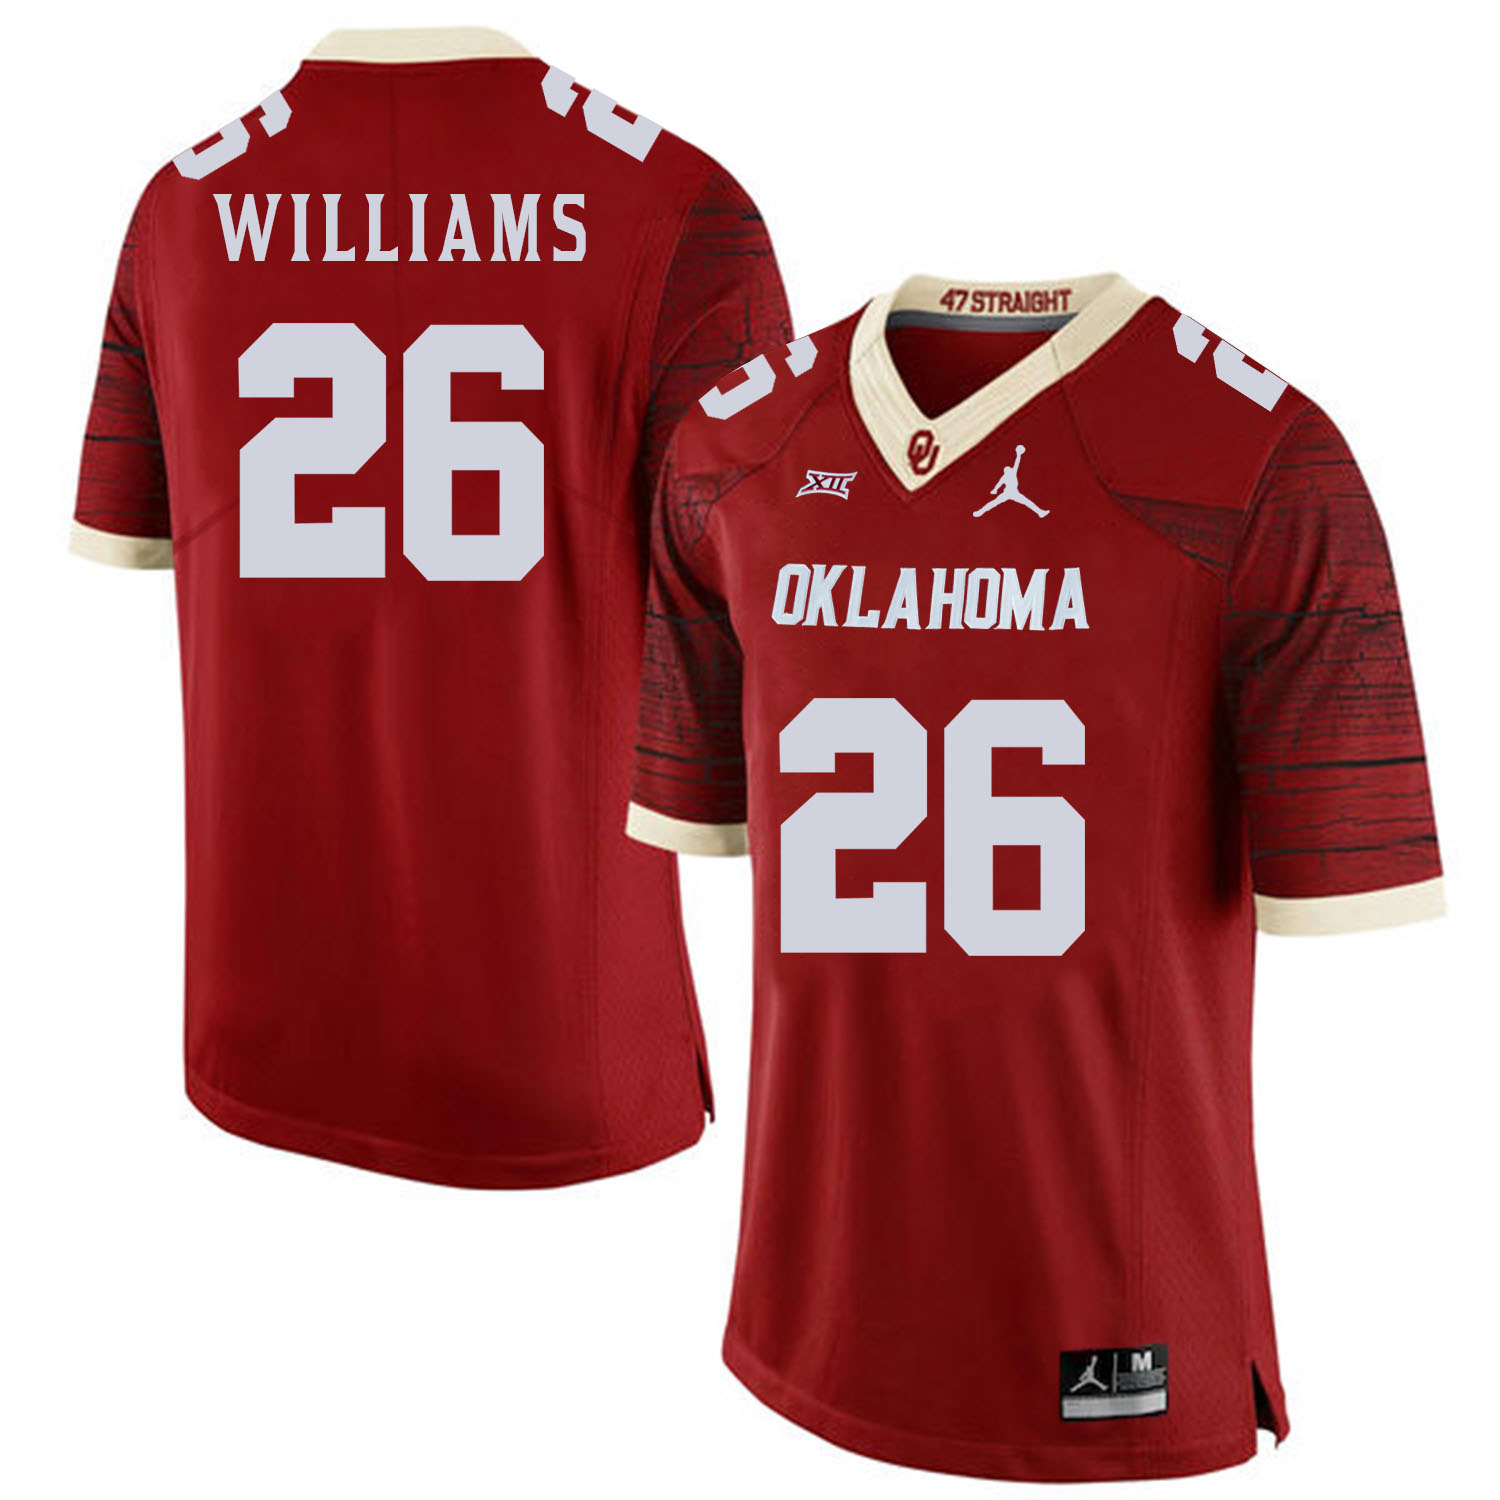 Oklahoma Sooners 26 Damien Williams Red 47 Game Winning Streak College Football Jersey - Click Image to Close